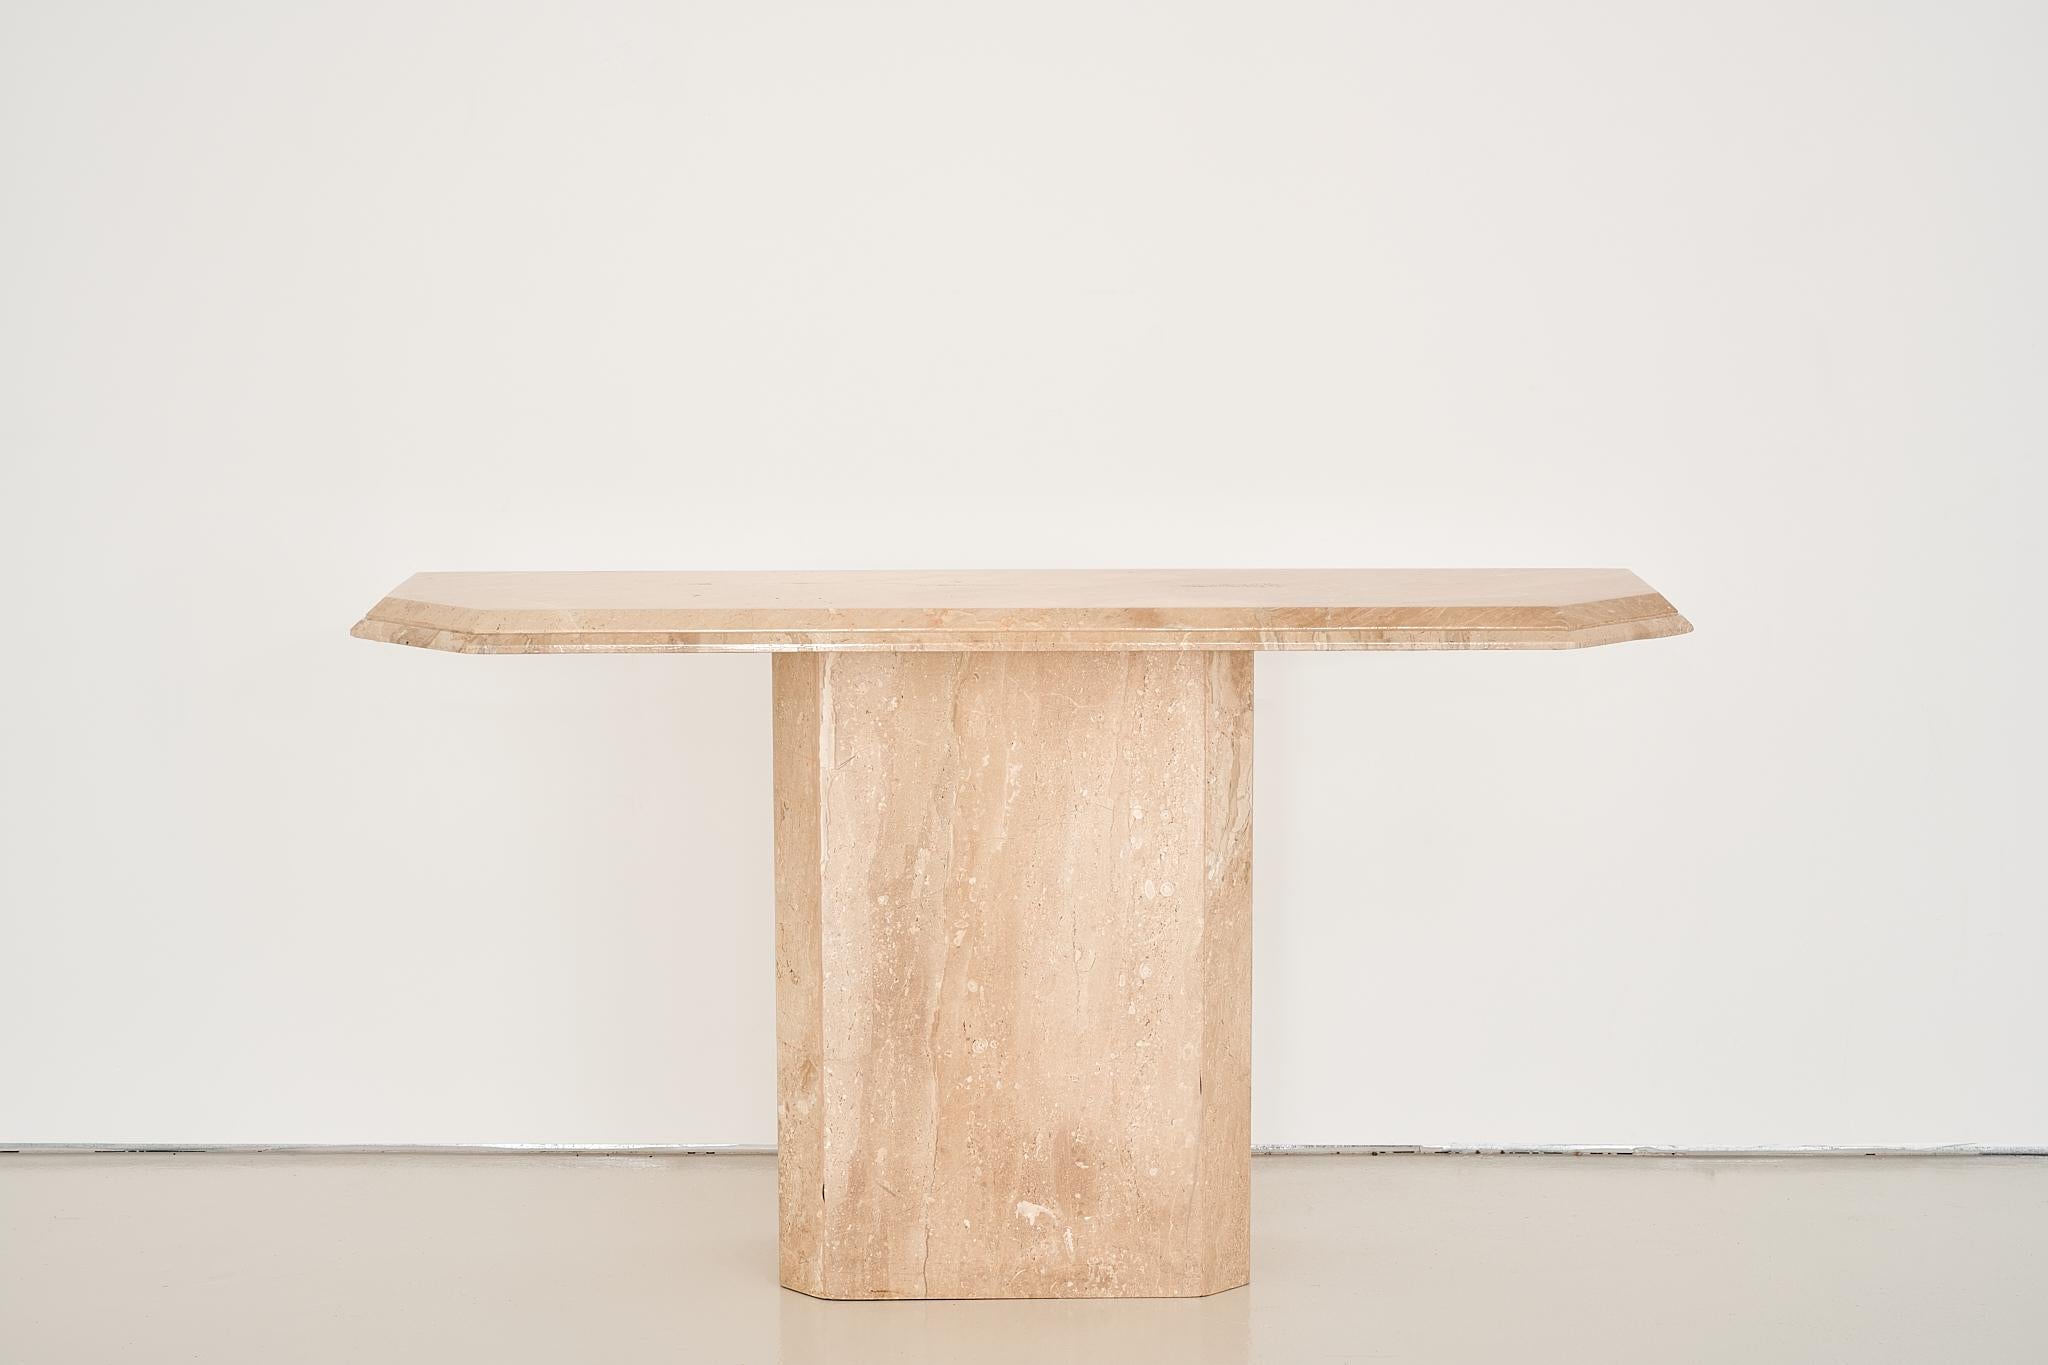 1970’s - 80’s Post Modern

Believed to be American-made when similar items were being imported from Italy.

Double chamfer table top.

Solid marble.

Sourced in Colorado.

Condition - excellent.

Measures: 55” L x 15.5” D x 30”